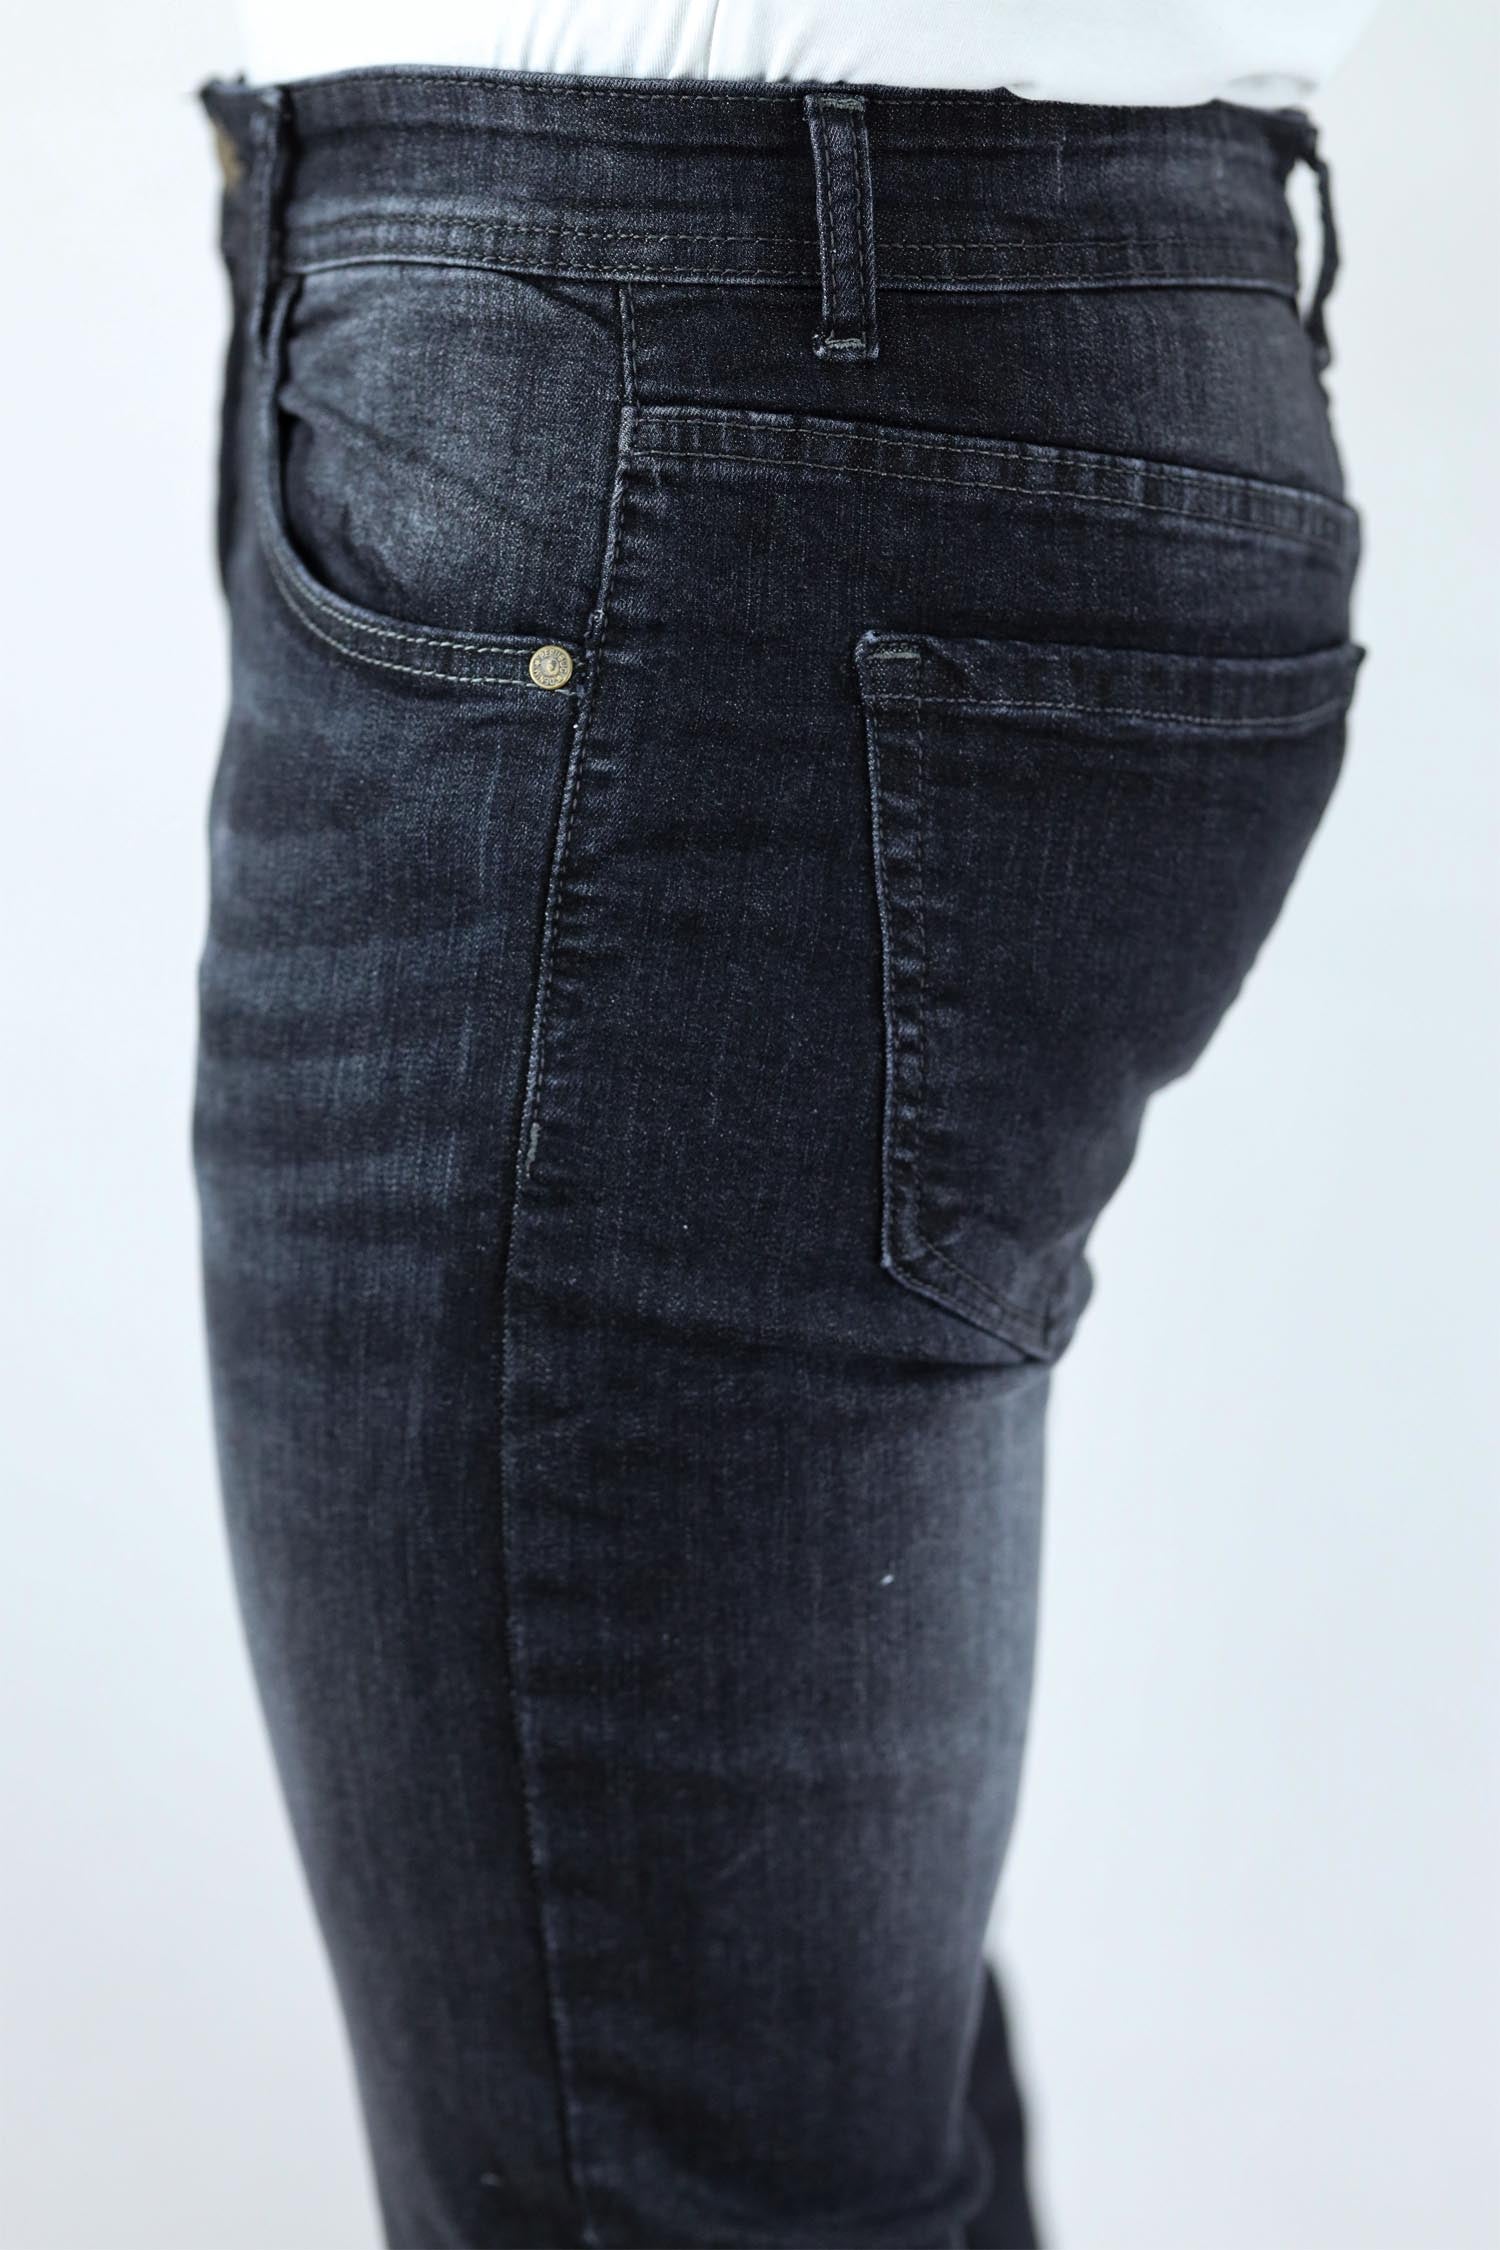 Light Faded Ankle Fit Turbo Jeans In Charcoal